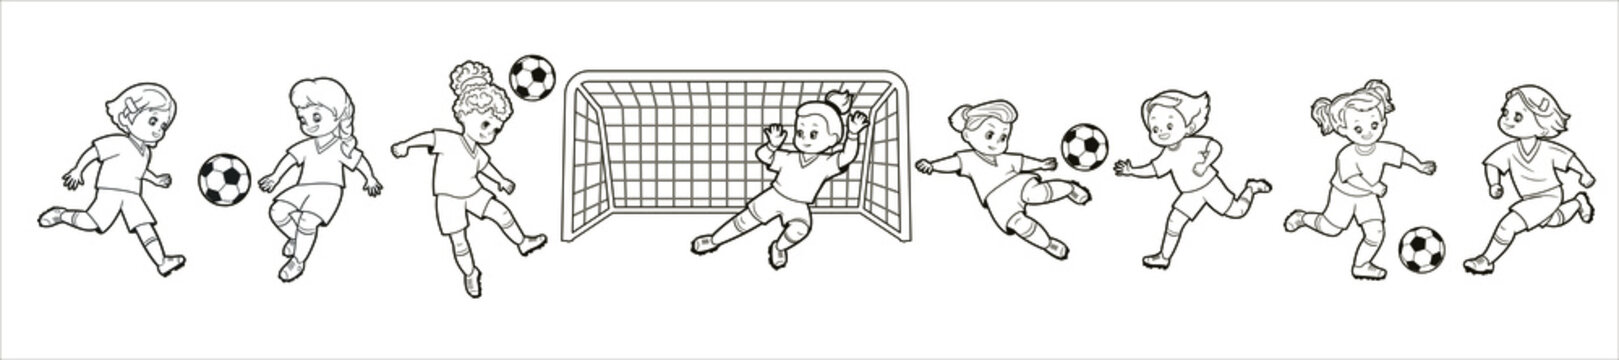 Coloring book; set of isolated images of girls soccer players in different poses playing soccer ball. Vector illustration in cartoon style, black and white line art